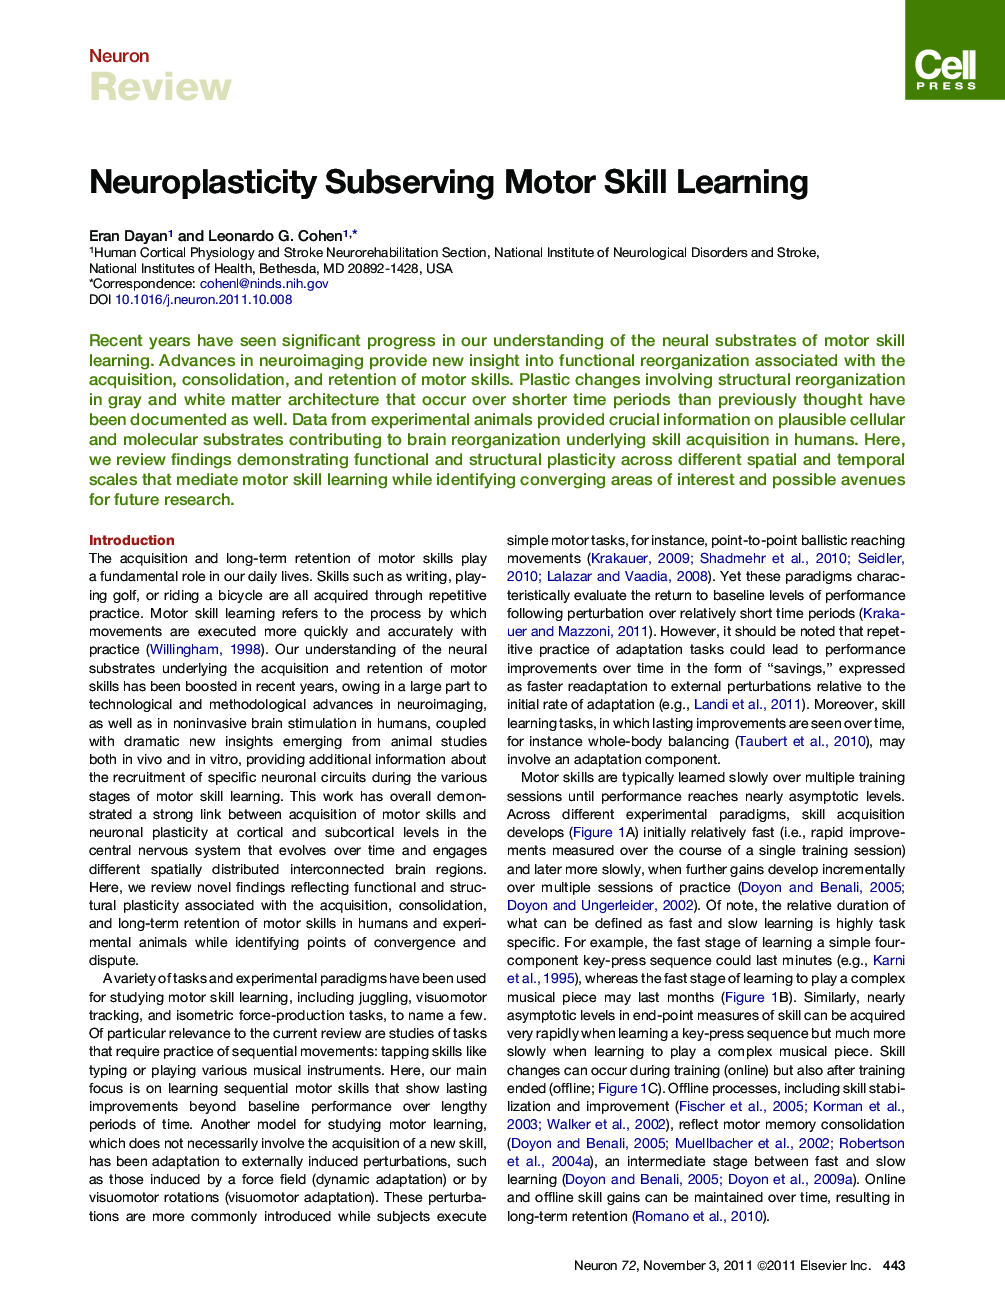 Neuroplasticity Subserving Motor Skill Learning